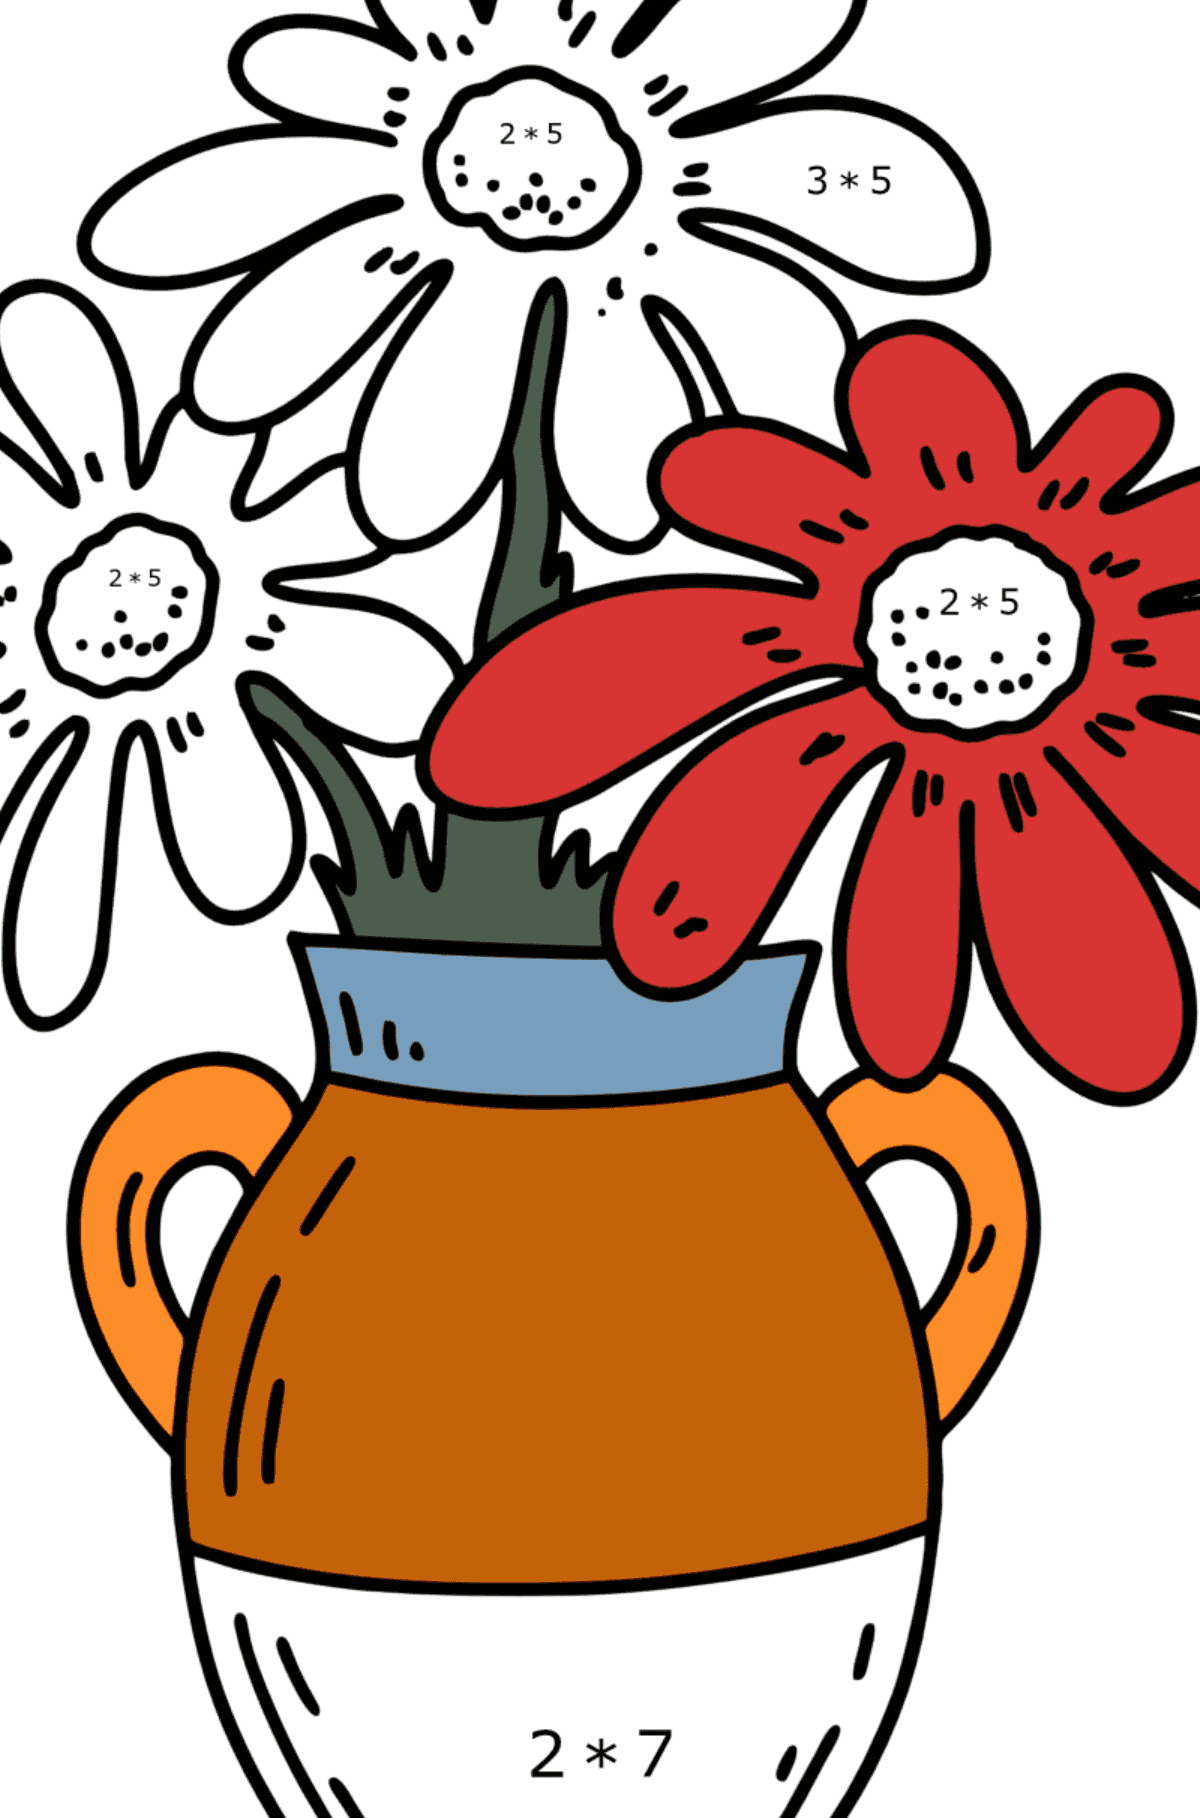 Summer Coloring page - Flowers in a vase - Math Coloring - Multiplication for Kids